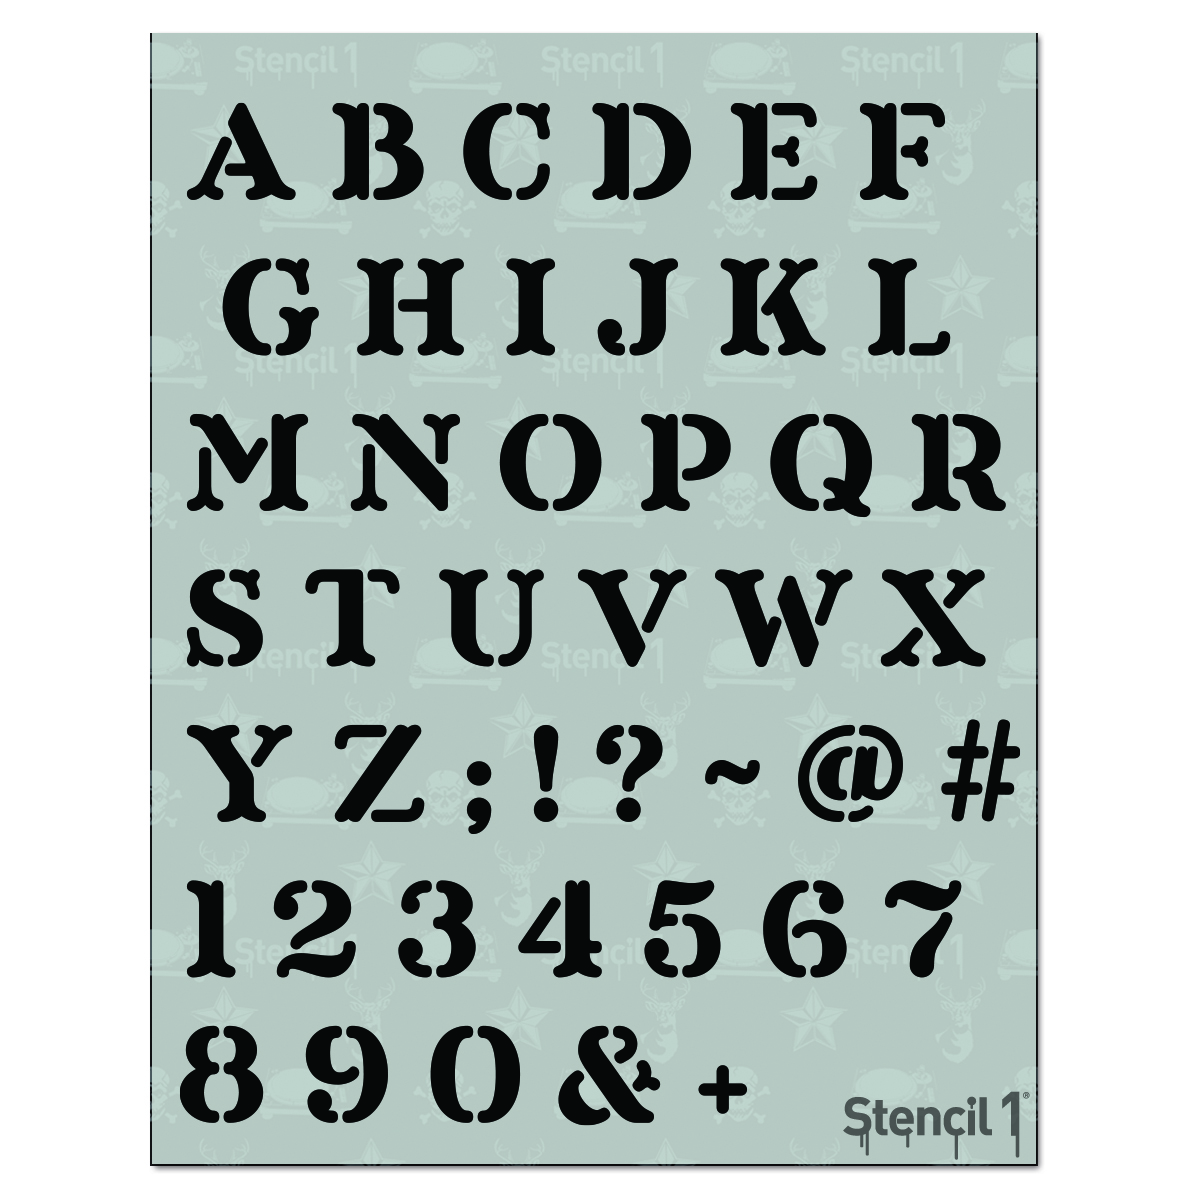 Full Alphabet Letter Stencils Kit - 4 Inch Stencil - Paint Your Own Sign